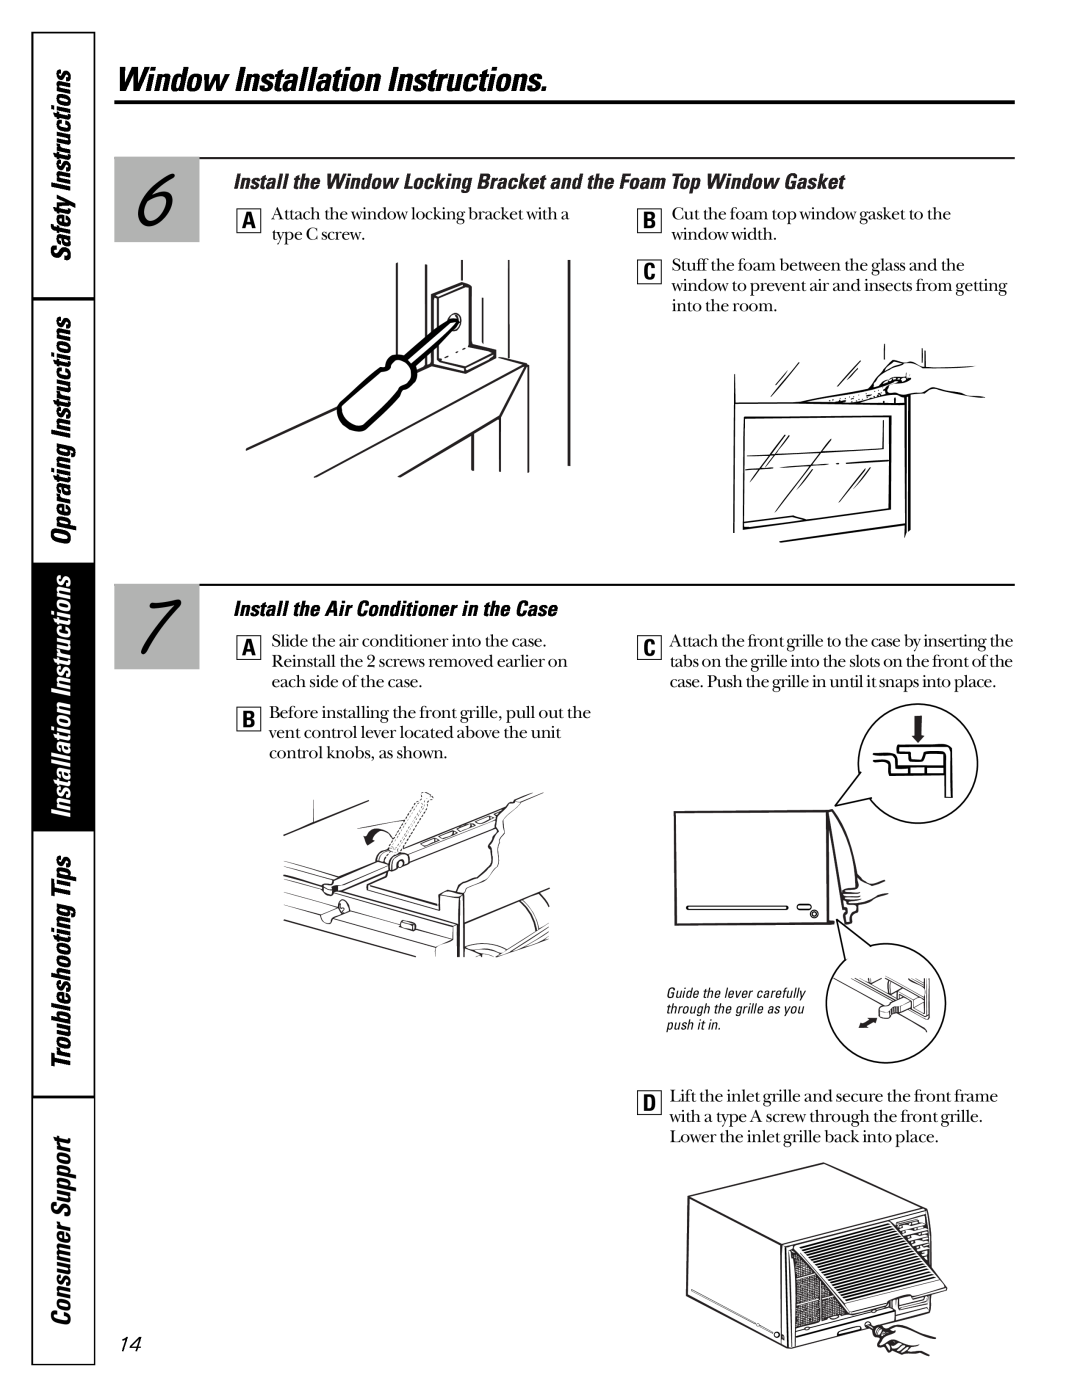 GE AG_07 Operating Instructions Safety Instructions, Consumer Support Troubleshooting, Window Installation Instructions 